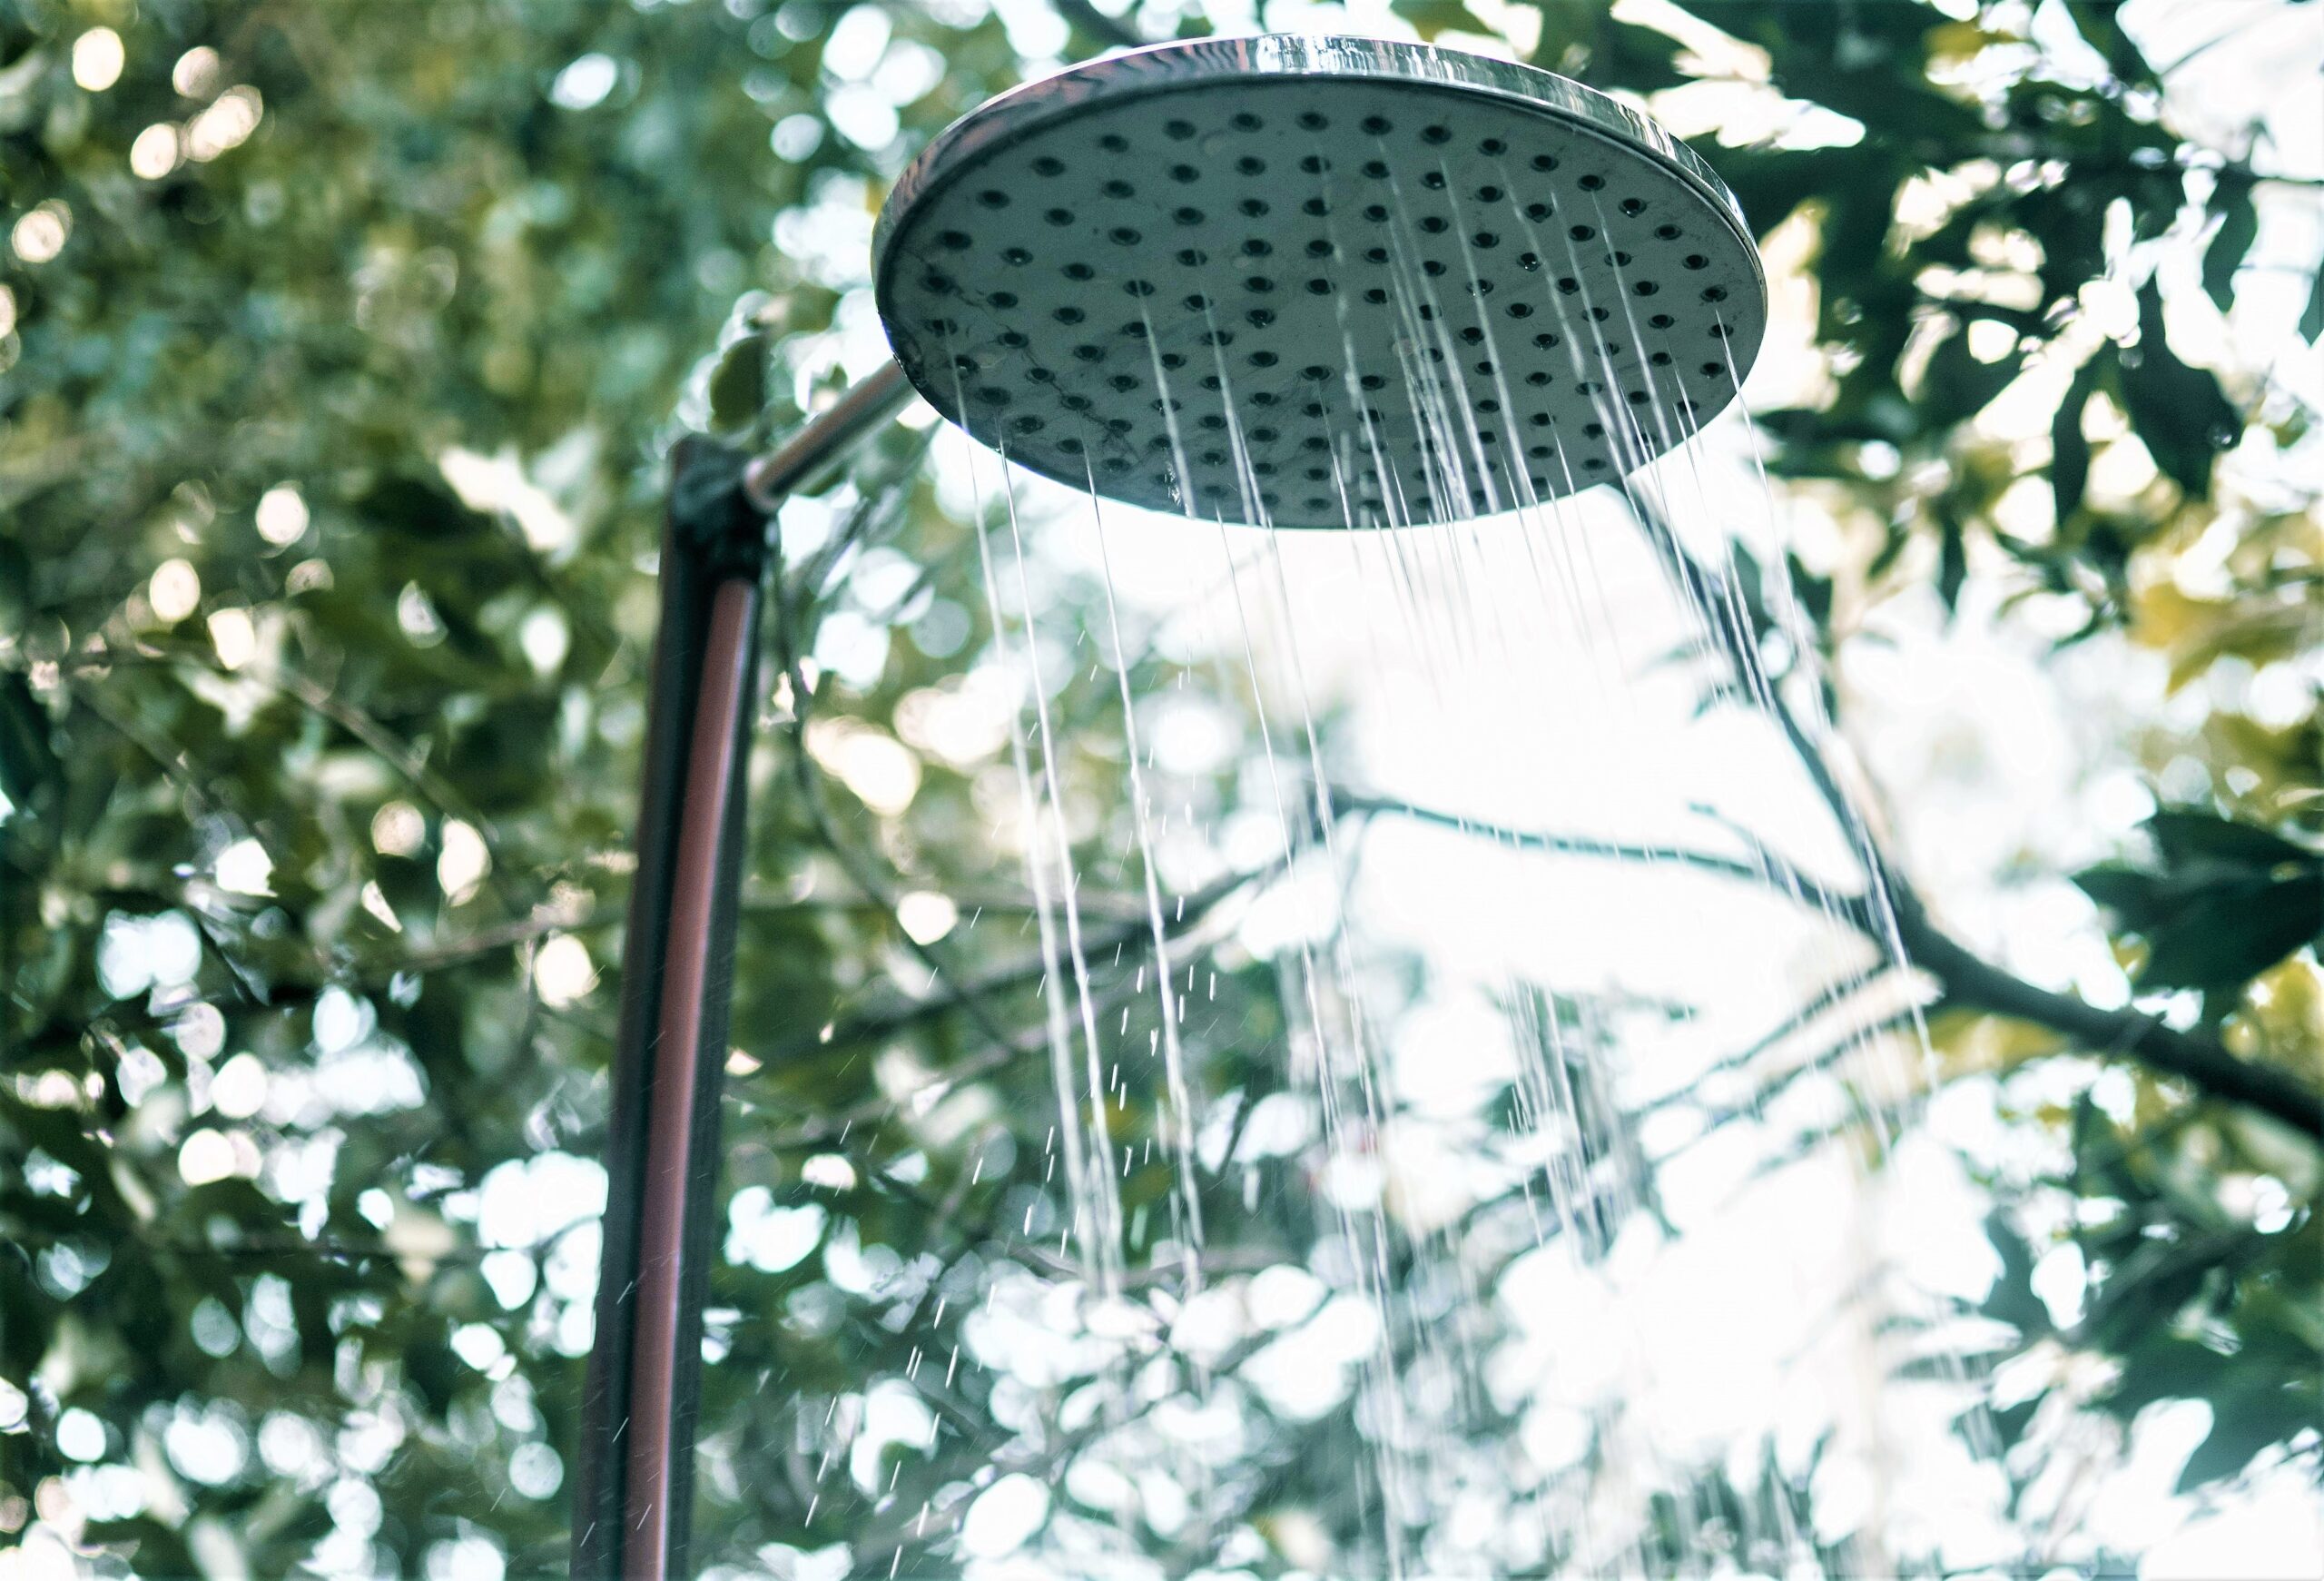 A rain shower head is set up in the outdoors with water flowing underneath.